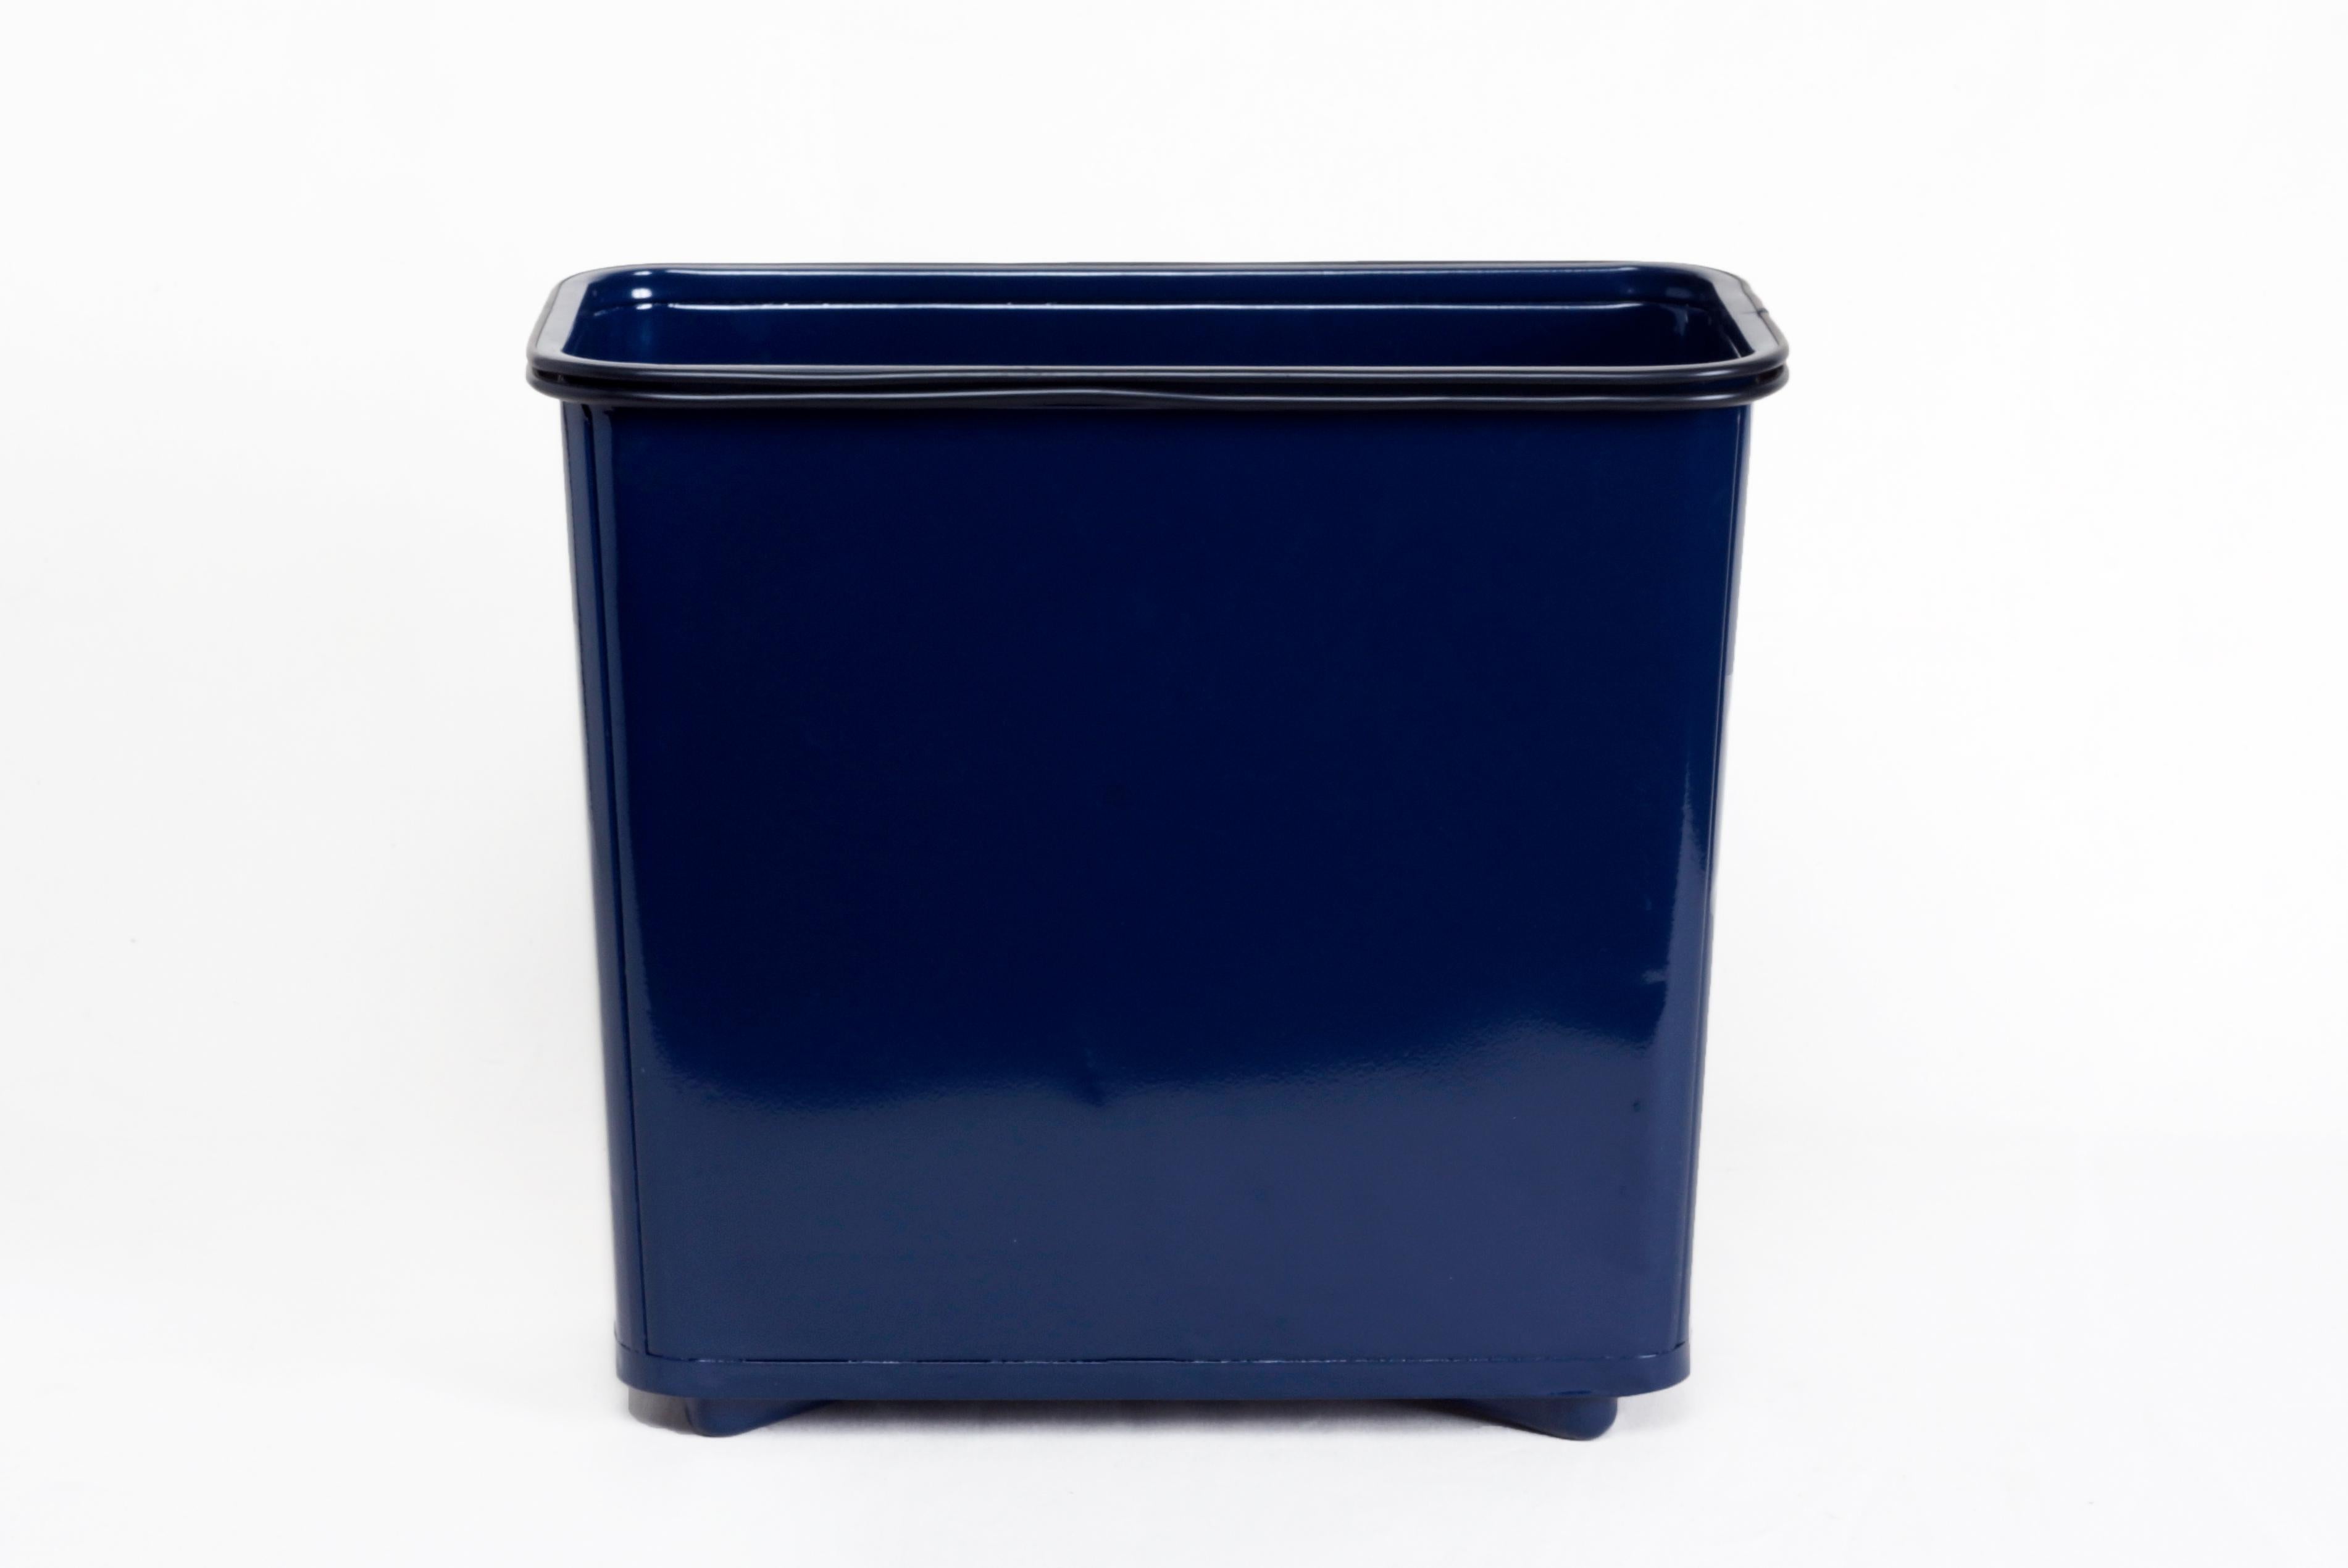 Excellent 1940s steel trash can refinished with a gloss midnight blue powder coat. Uncommon slender rectangular shape with rubber trim and steel feet that lift it slightly off the ground. Please note gentle dents to vintage steel as pictured.